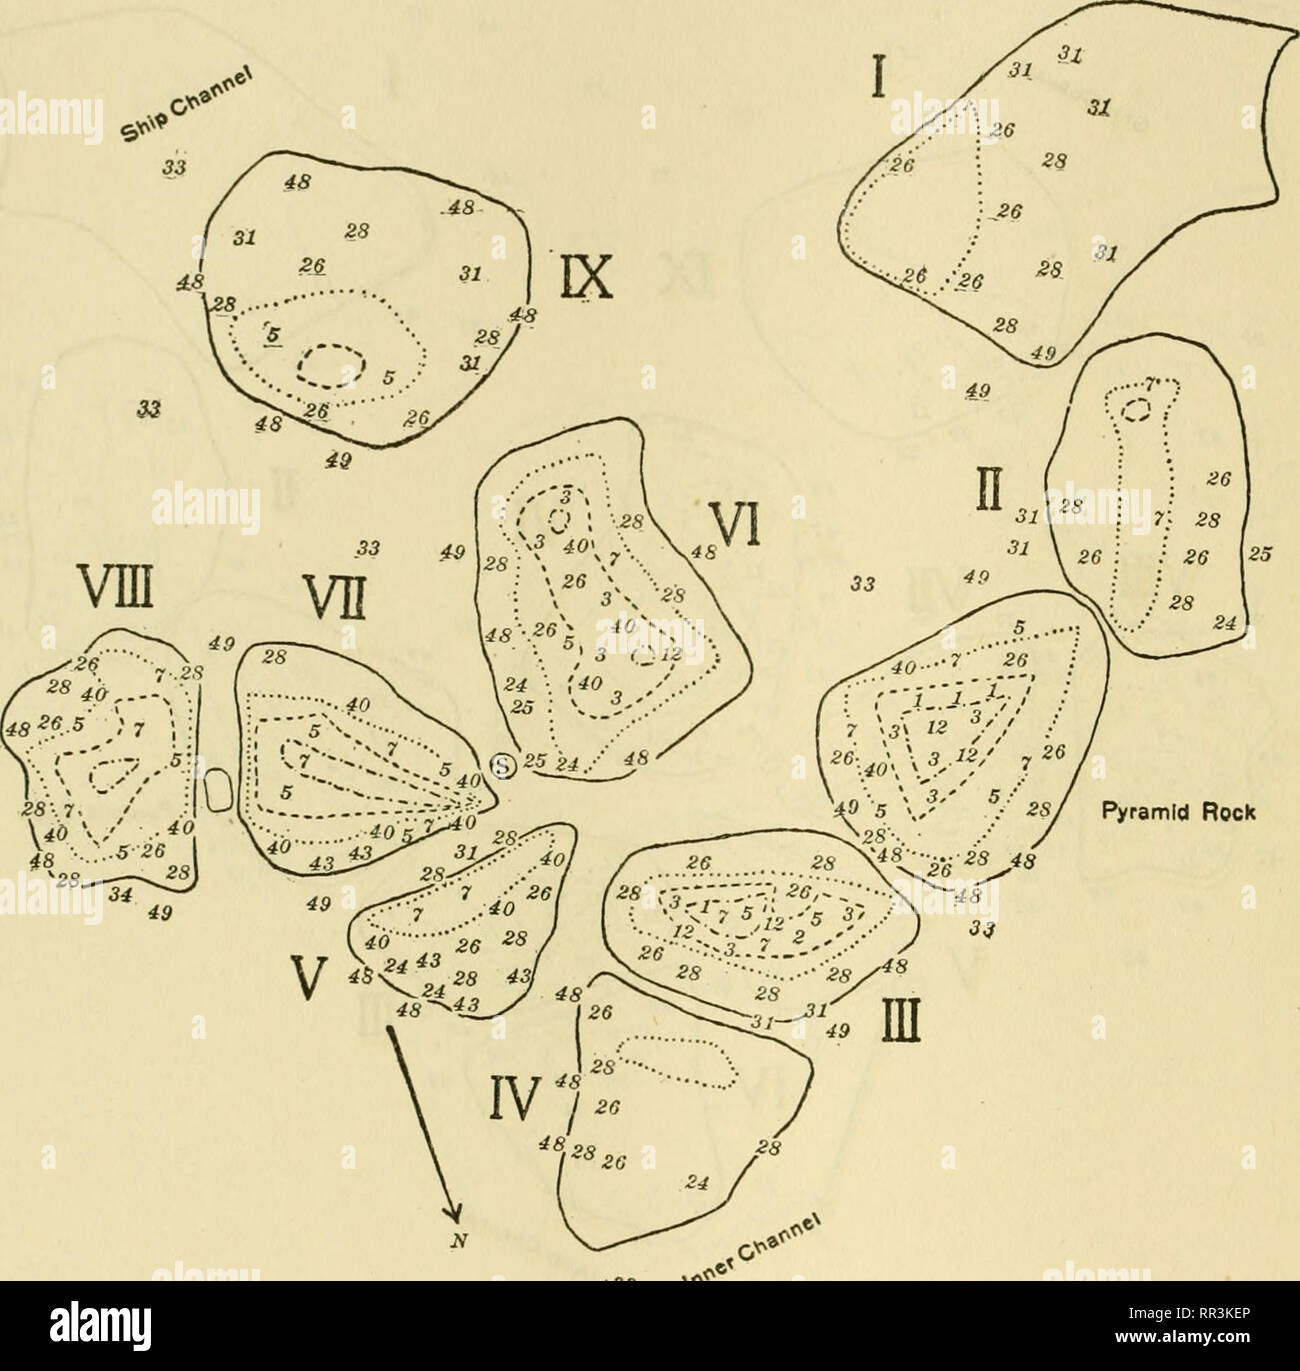 . [A biological survey of the waters of Woods Hole and vicinity. Marine animals; Marine plants. 540 BULI.ETIN OF THE BUREAU OF FISHERIES.. PyramW Rock 33 &lt;^' Chart 270.—Distribution of algae on Spindle Rocks, June 29, 1905. The character of the vegetation on the rocks had greatly changed from that of May 22 (chart 269), and marked the beginning of the characteristic summer flora and the end of the spring season. A green zone on the upper parts of the rocks was composed chiefly of Ulothrix implexa (3), Ulva Laduca var. rigida (5), and Enleromorpha intcstinalis (7); Cladophora lanosa var. un Stock Photo